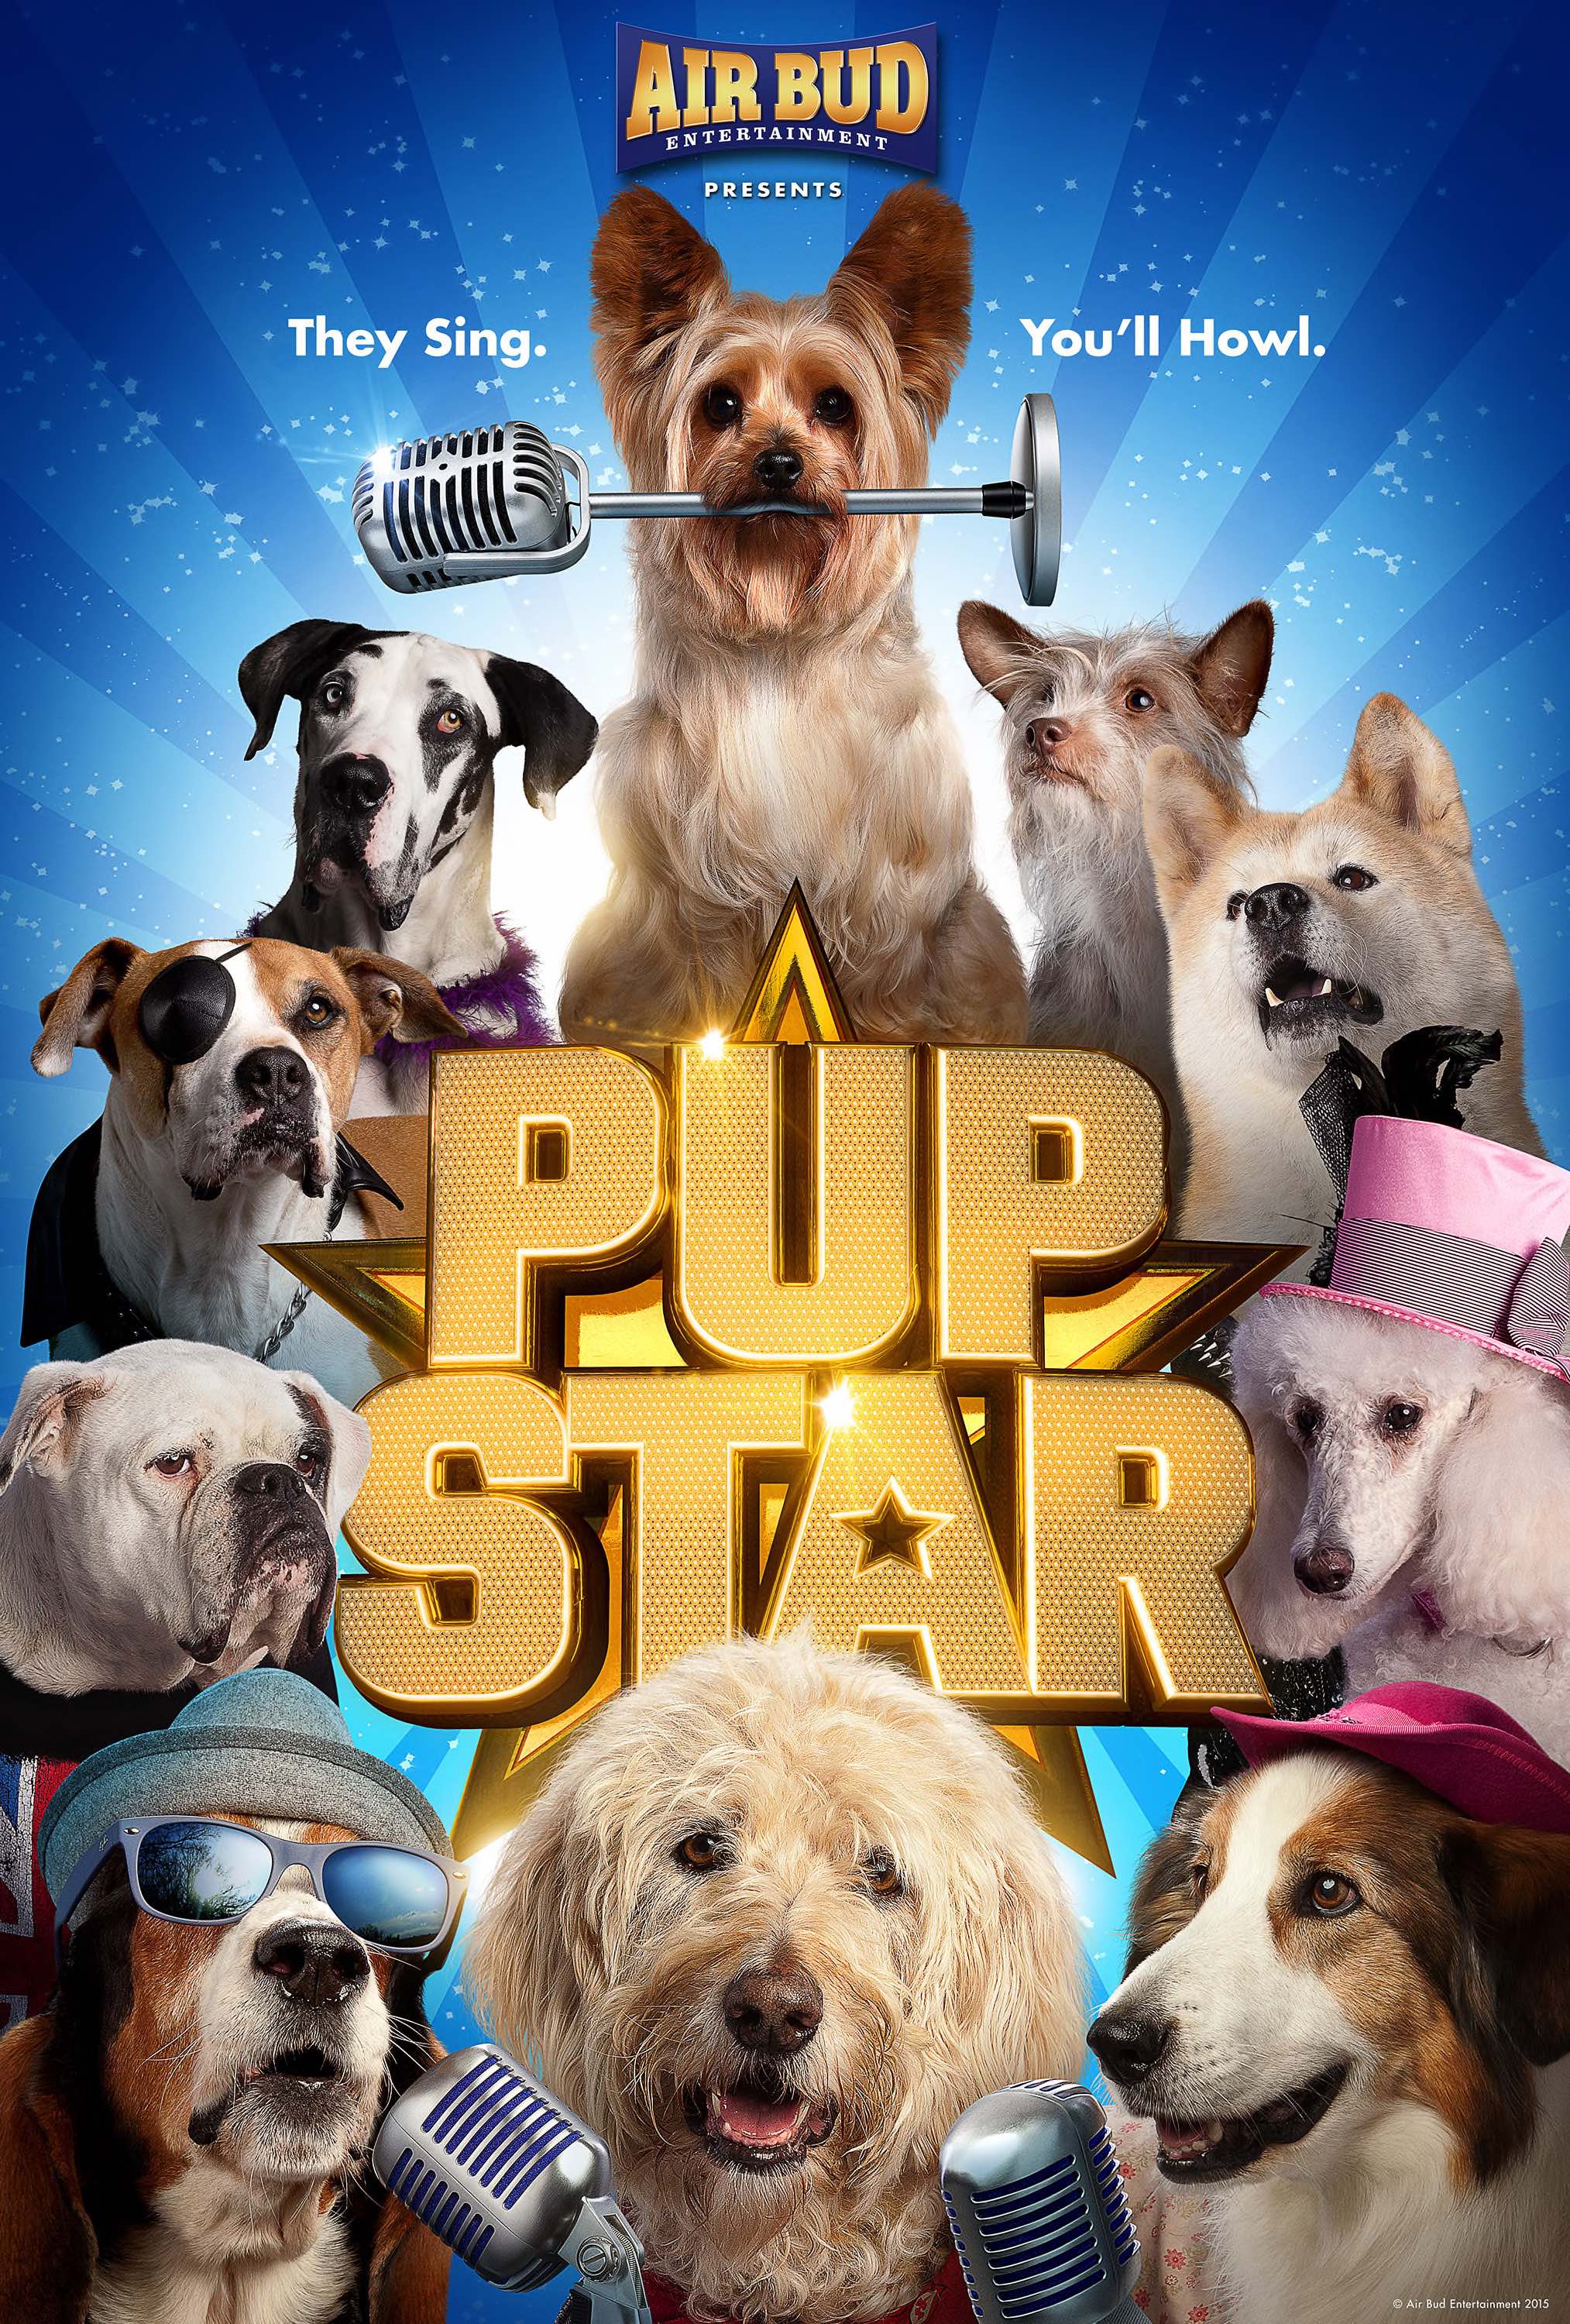 AIR BUD ENTERTAINMENT Announces the Broadcast Premiere of 'PUP STAR' -  Family Adventure Debuts on Disney Channel Friday, February 17, 8:30 p.m.  ET/PT All-New Franchise Puts a Dog-Filled Spin on America's Popular